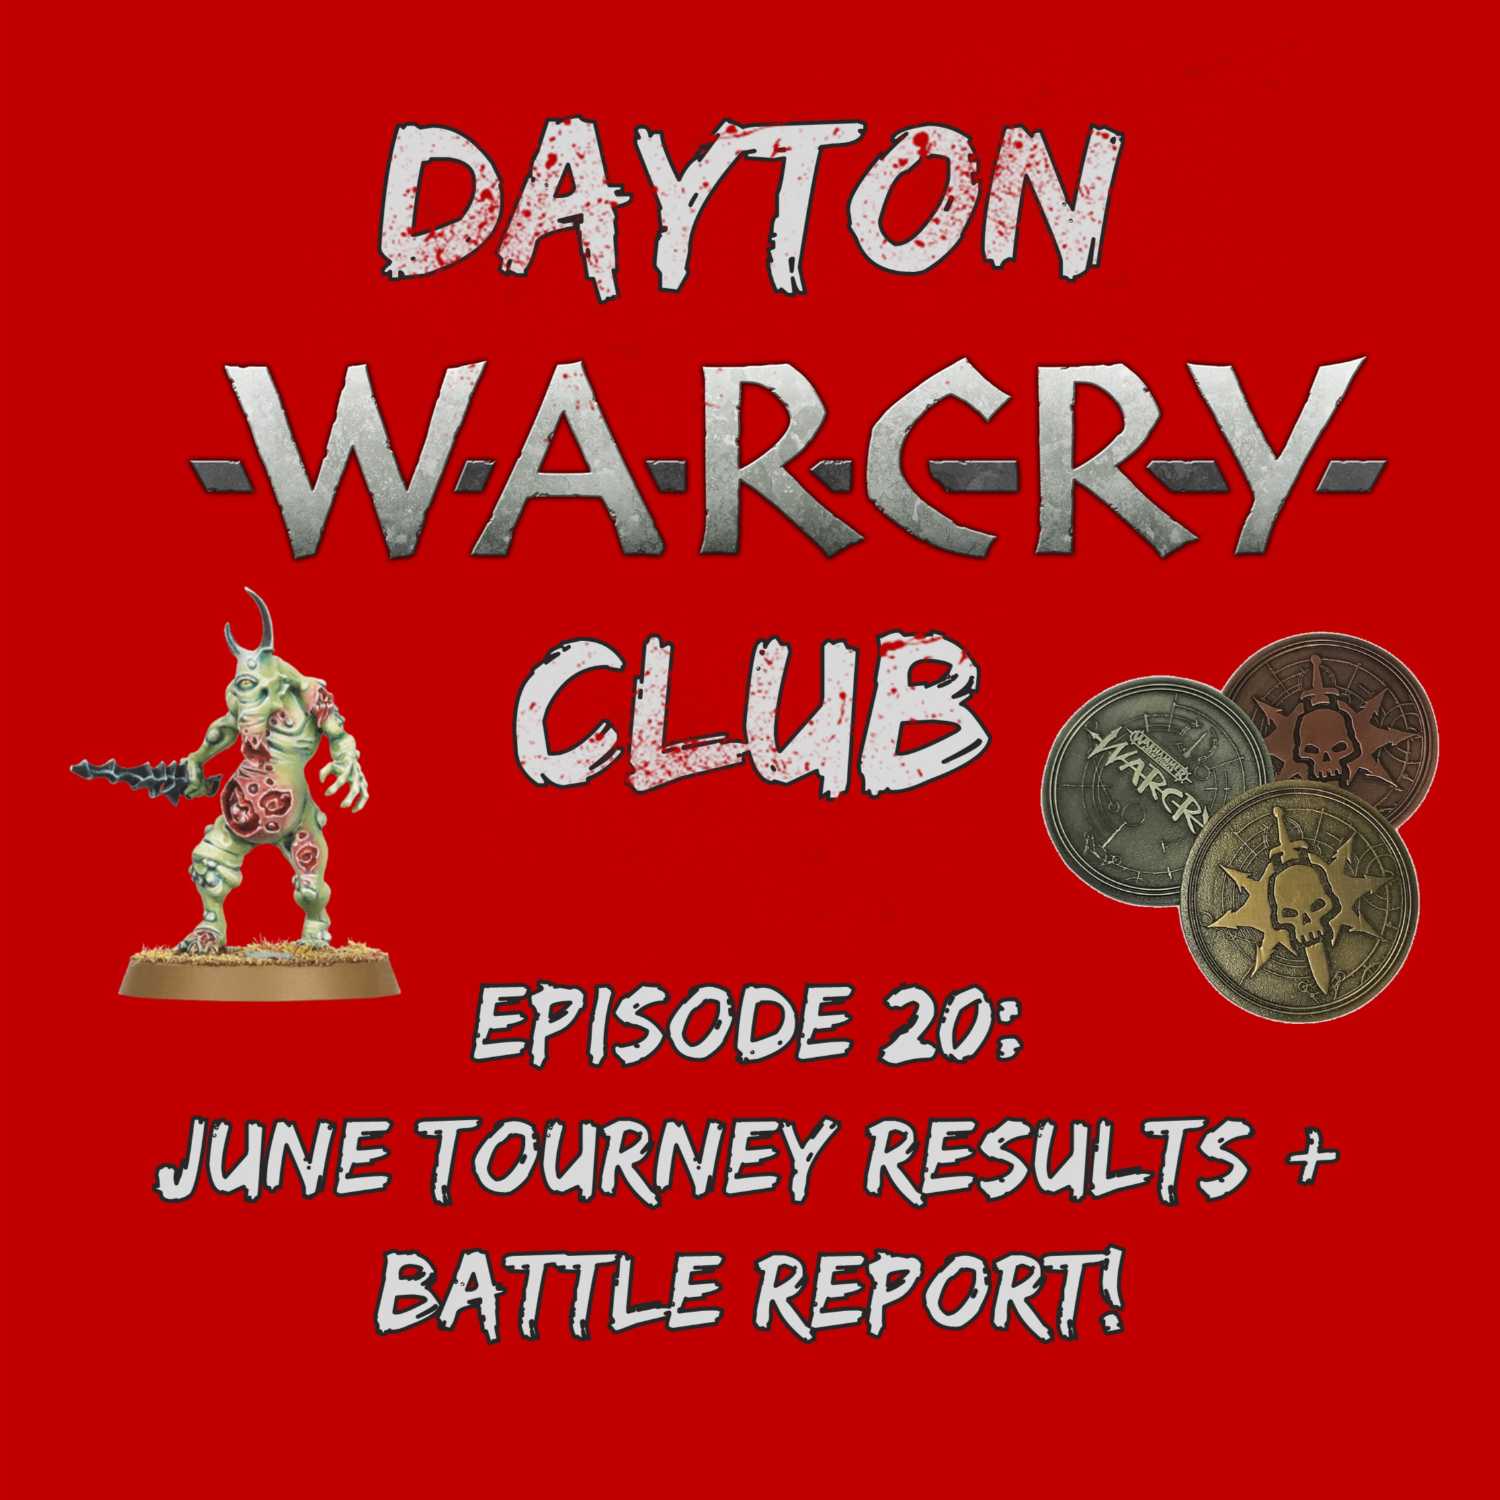 Dayton Warcry Club Episode 20: June Tourney Results + Battle Report!